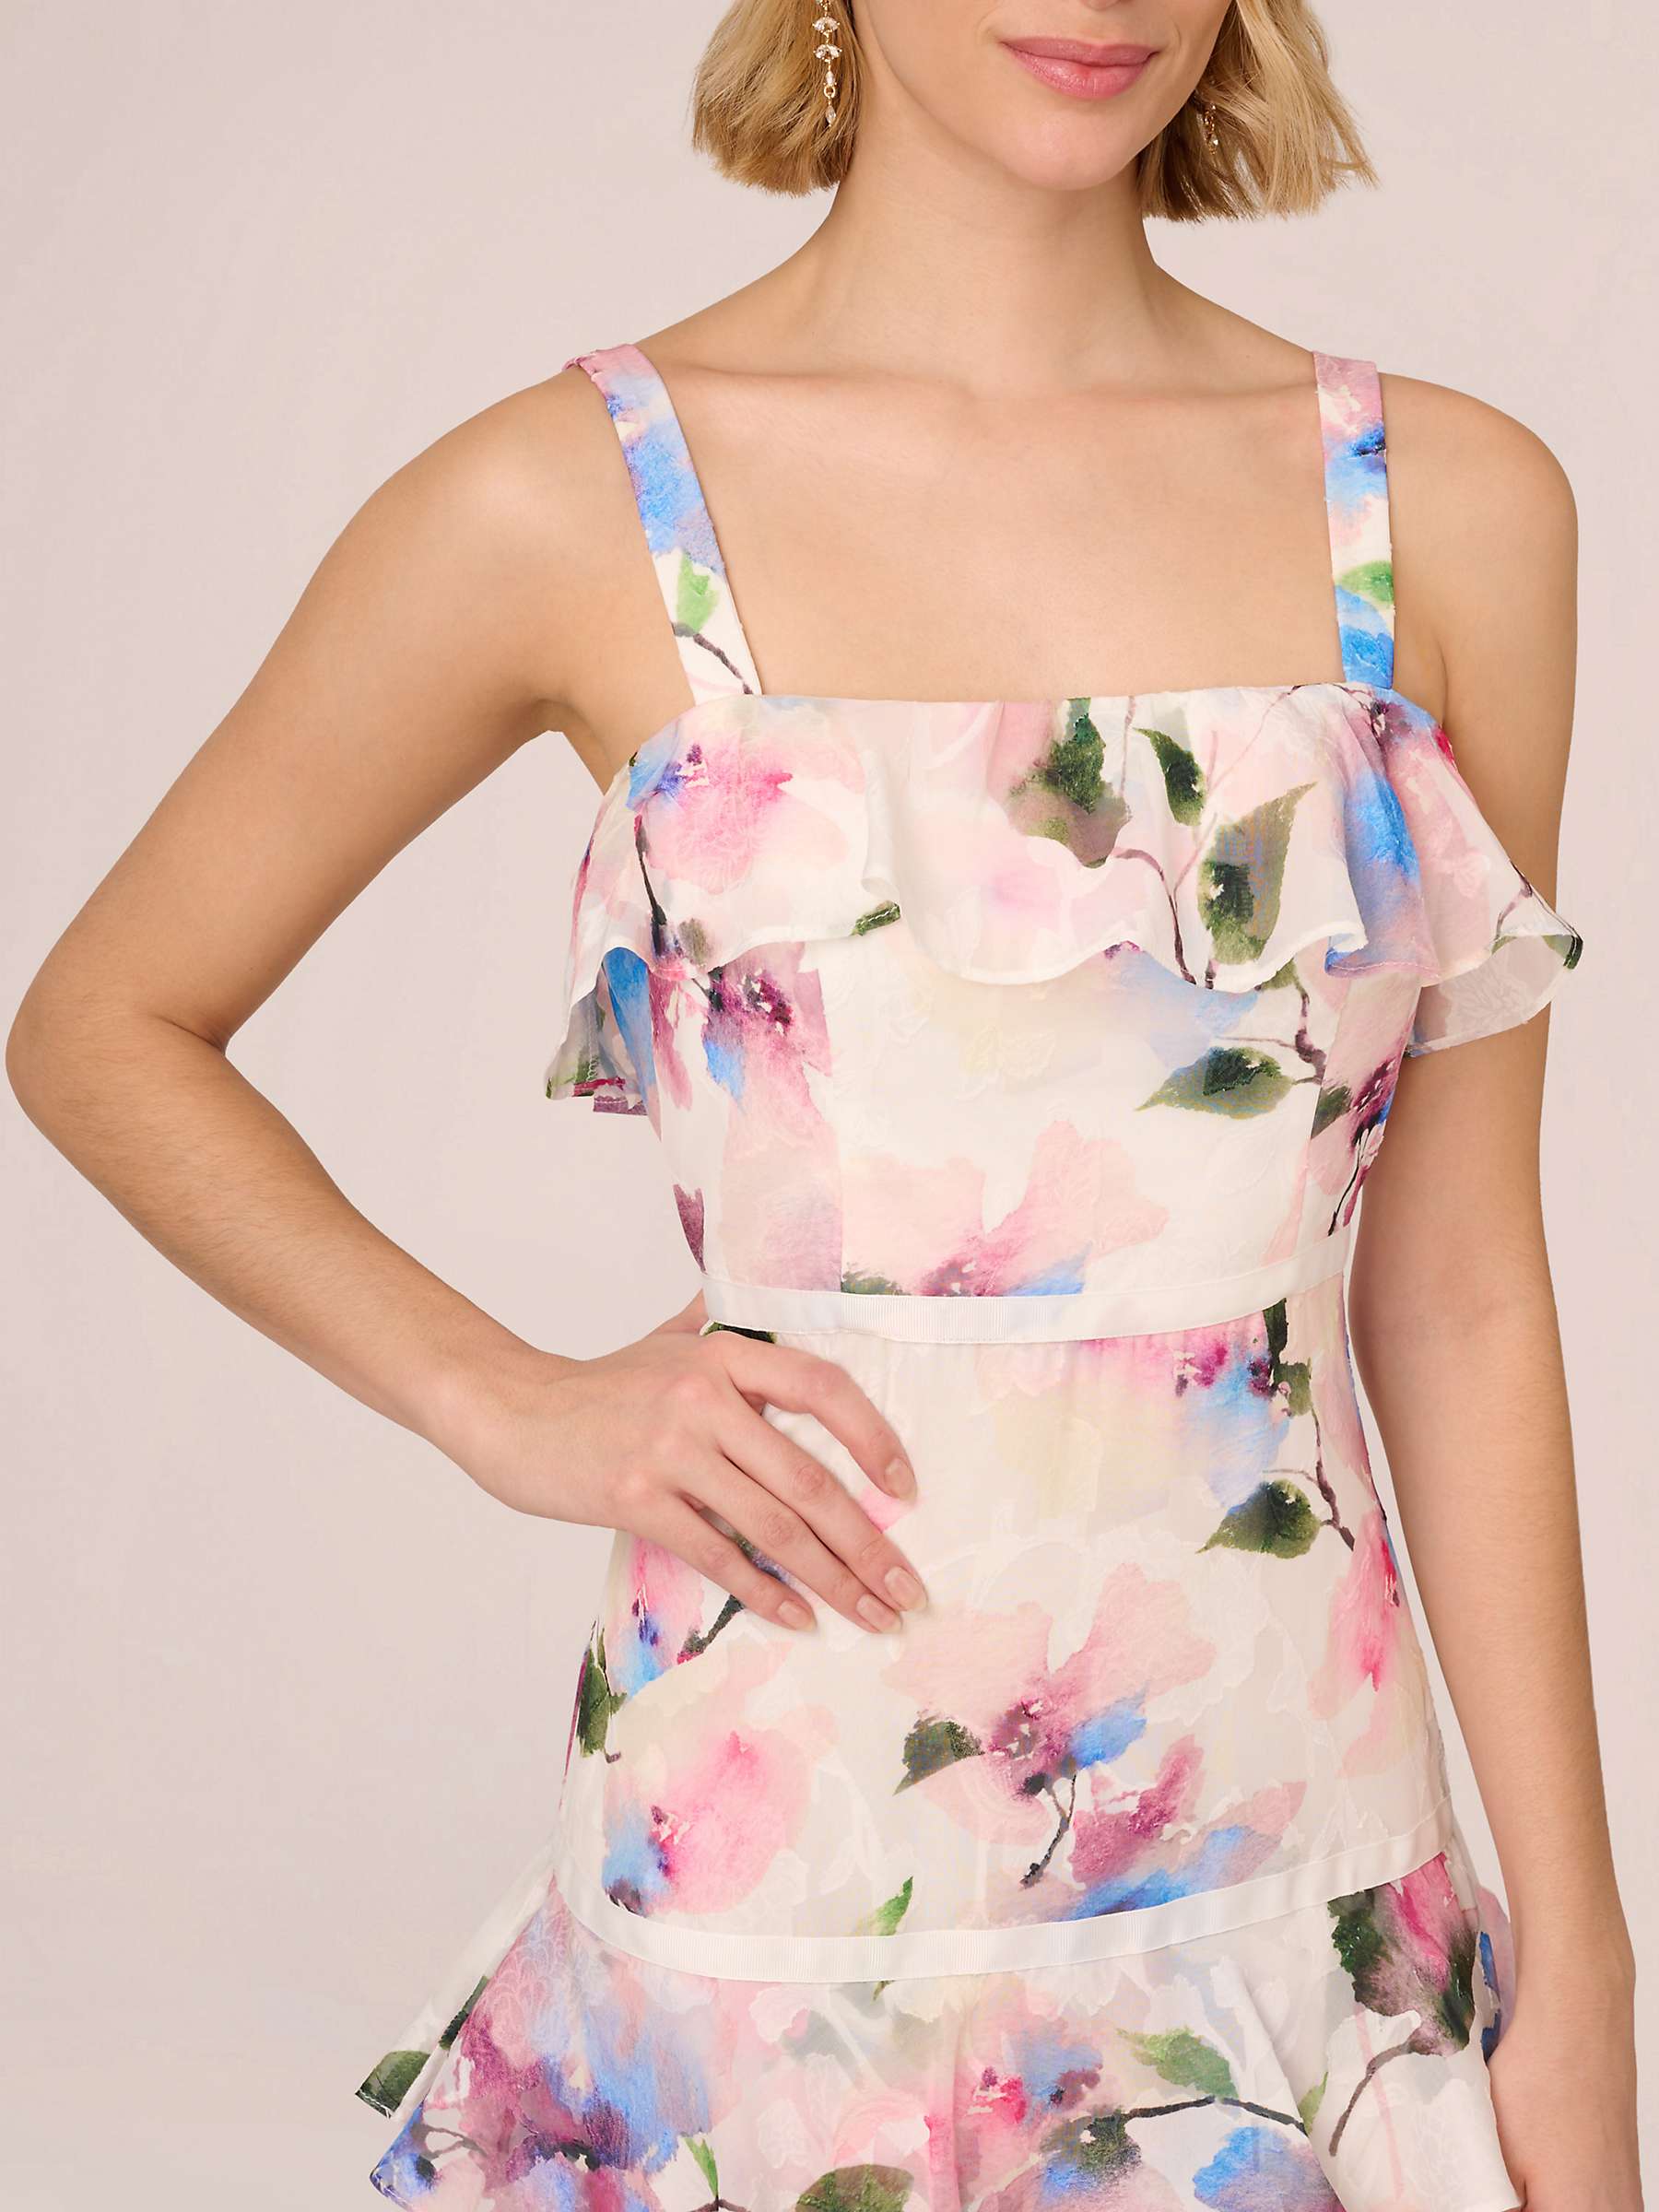 Buy Adrianna Papell Chiffon Maxi Dress, Ivory/Pink/Multi Online at johnlewis.com